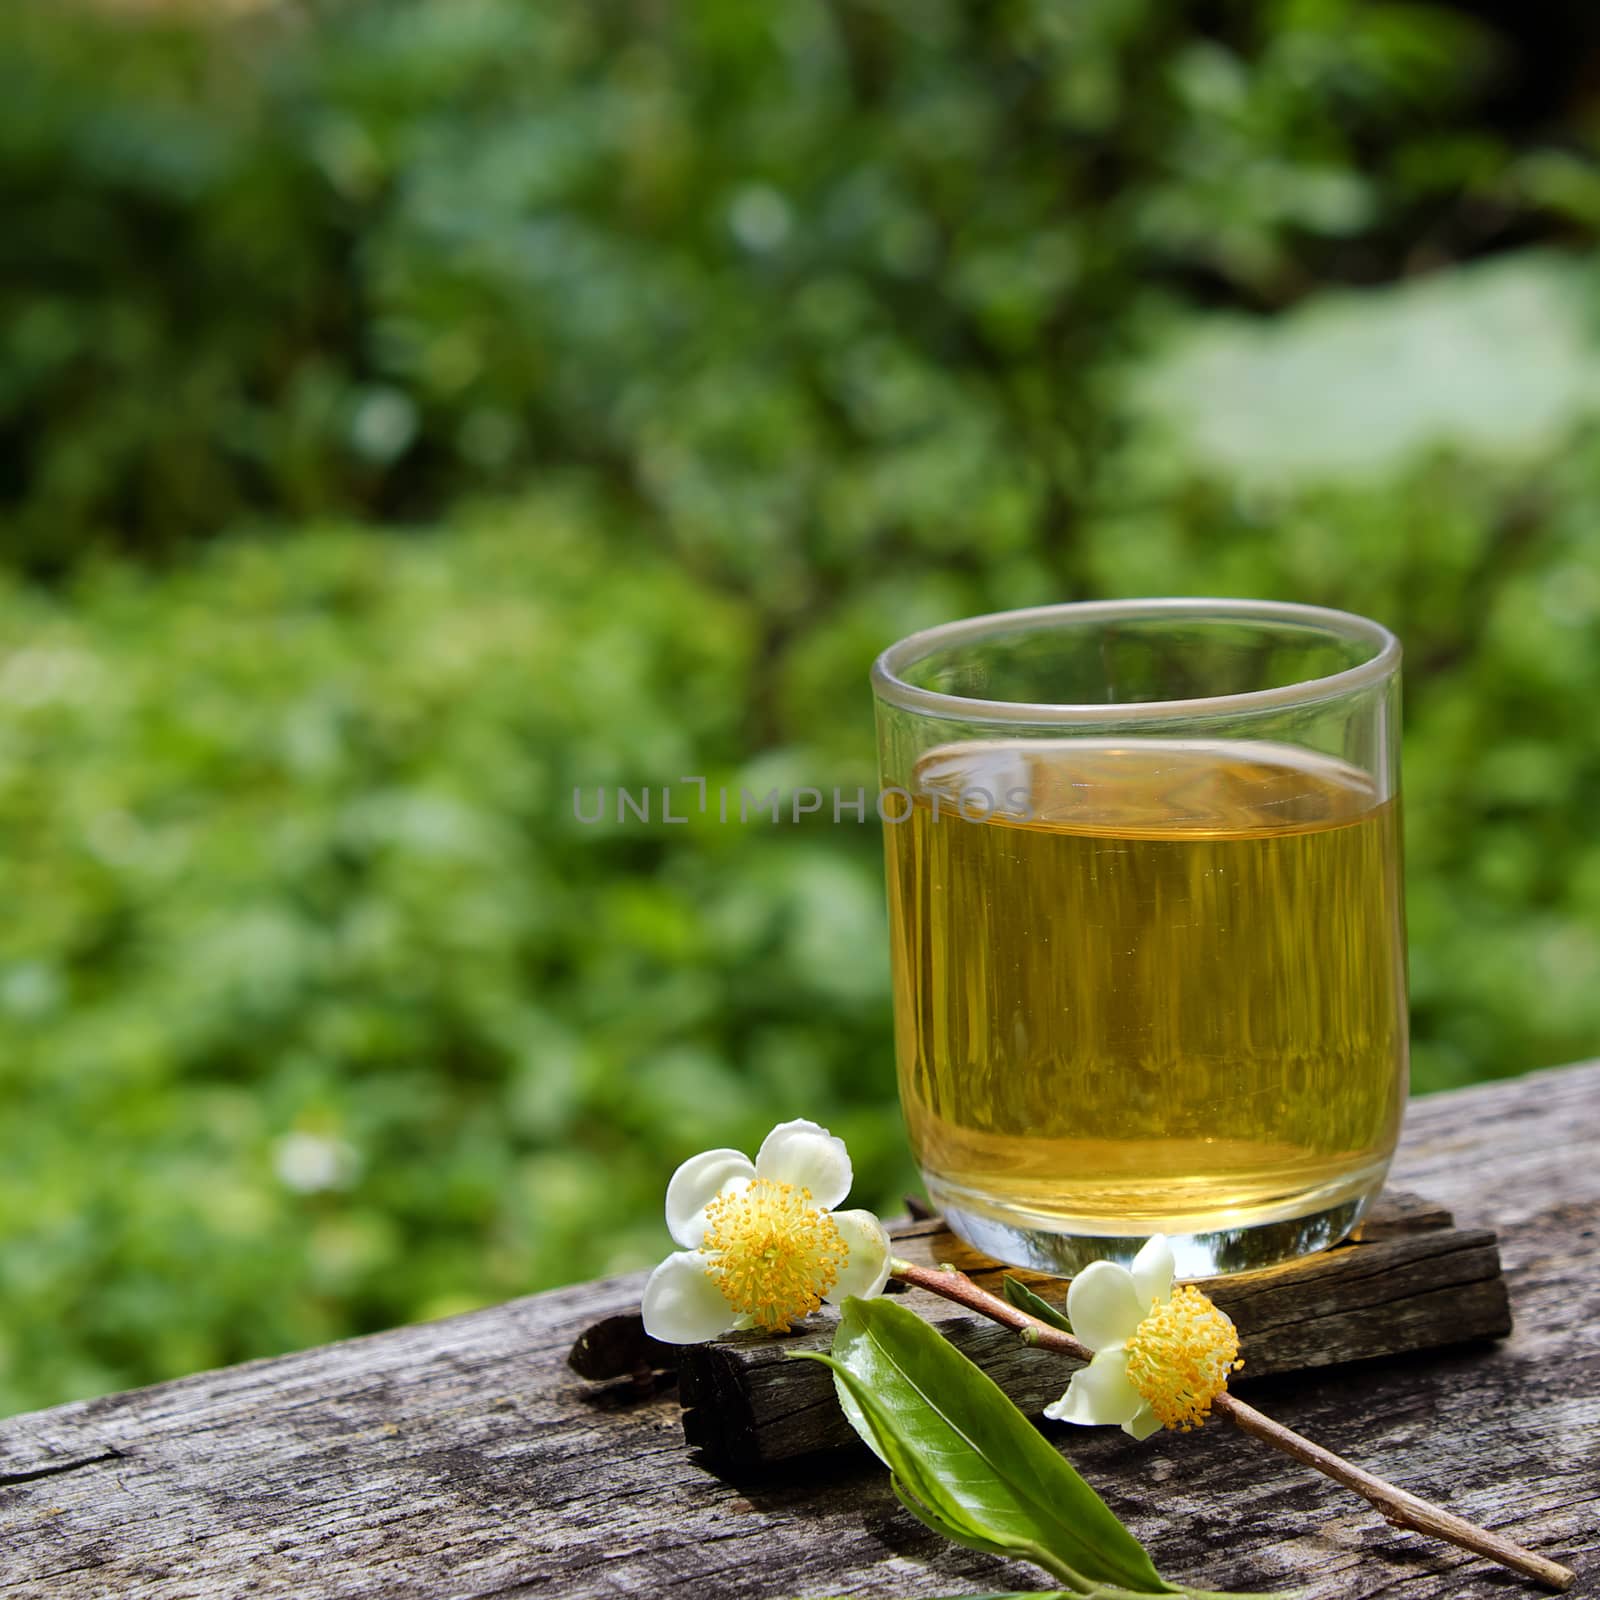 Green tea cup on wooden background with leaf and flower, green tea is good drink, healthy beverage can antioxidant, rich vitamin